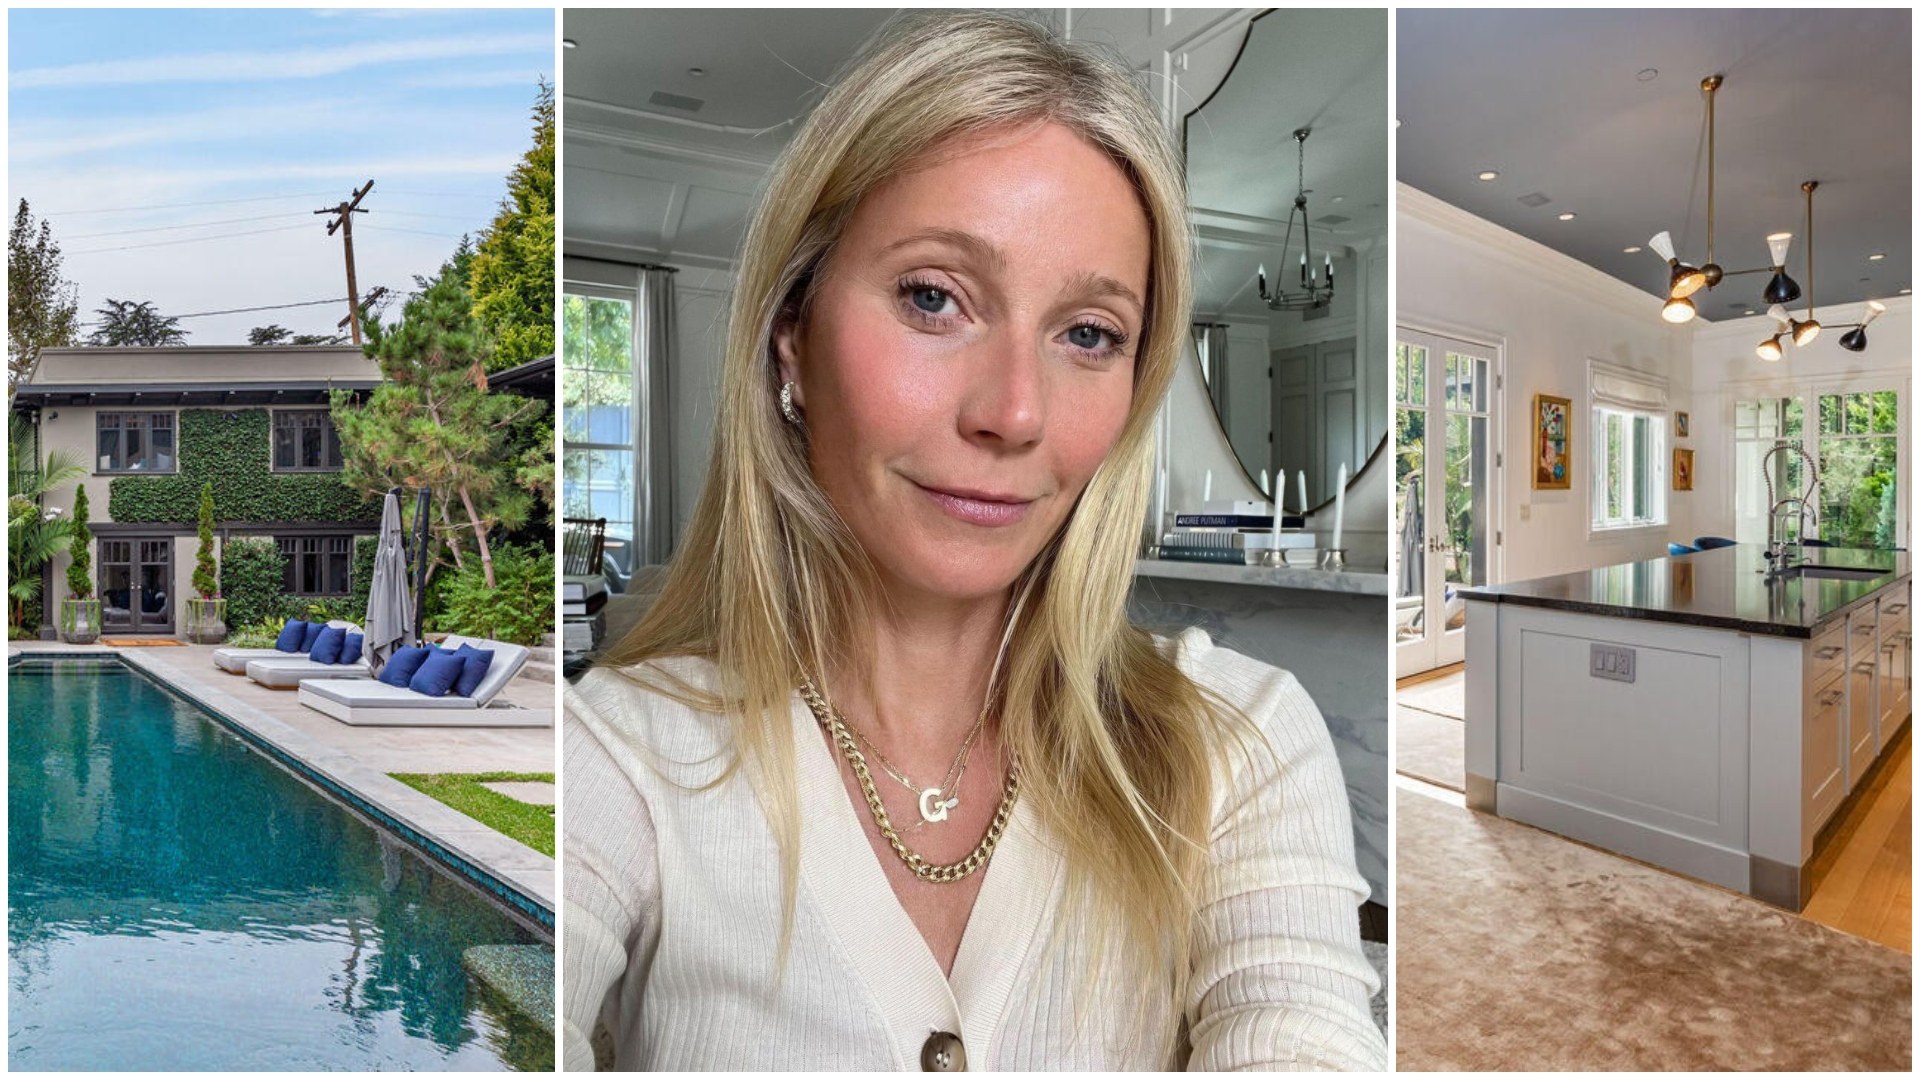 Gwyneth Paltrow and her childhood home in California, listed on sale for US$17.5 million. Photos: @gwynethpaltrow/Instagram; Compass